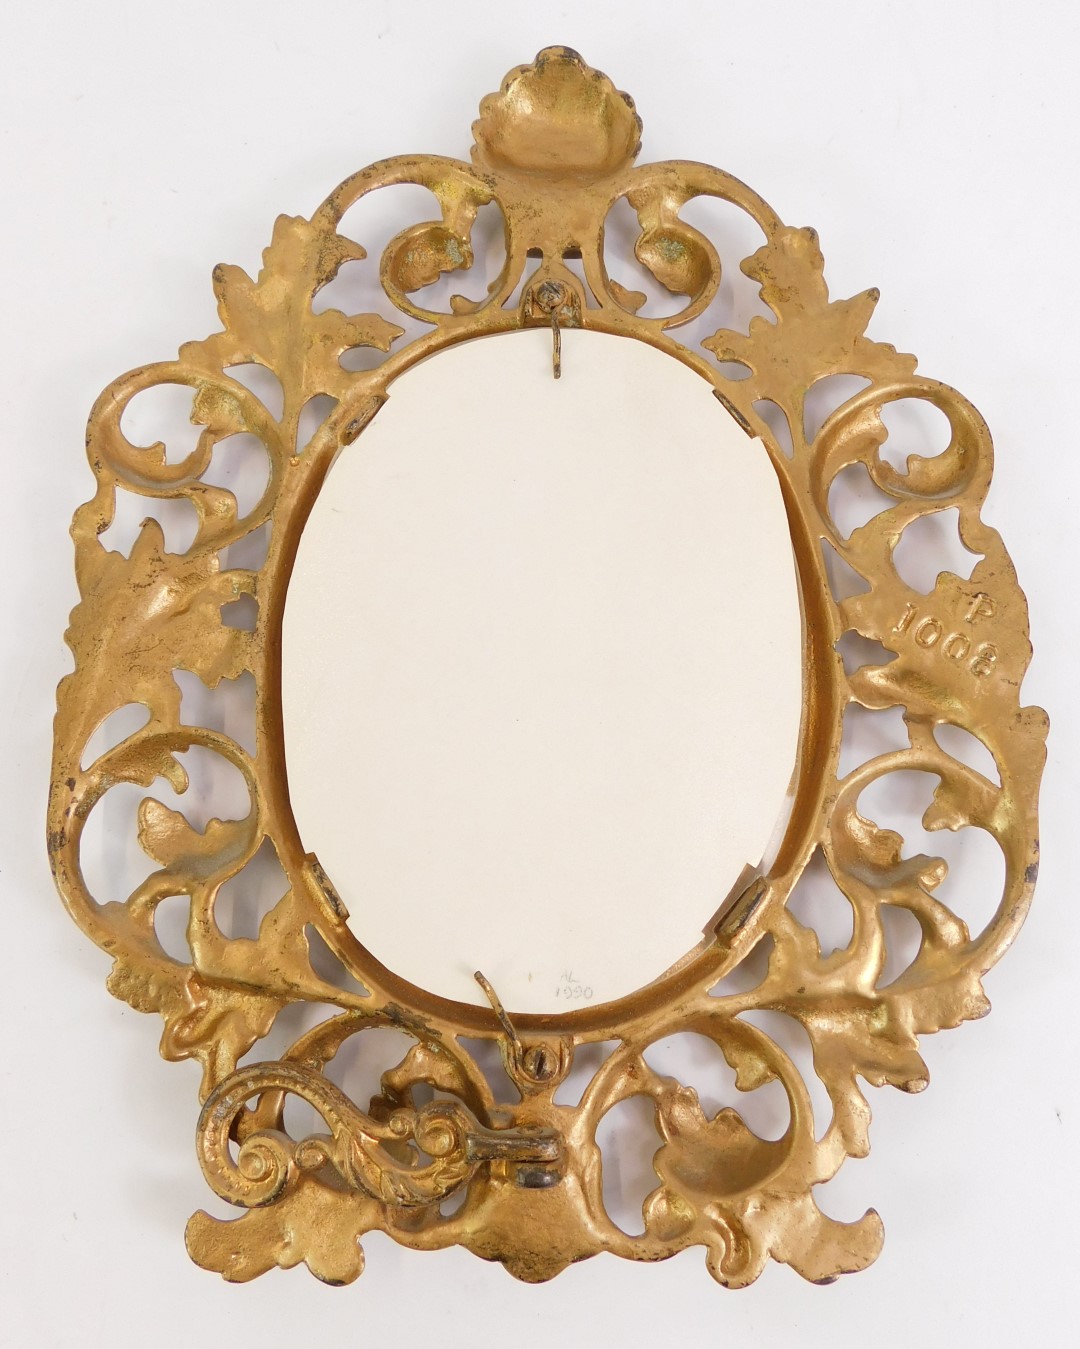 A pair of late 19th/early 20thC gilt metal photograph frames, each with an oval crest, with arched - Image 2 of 2